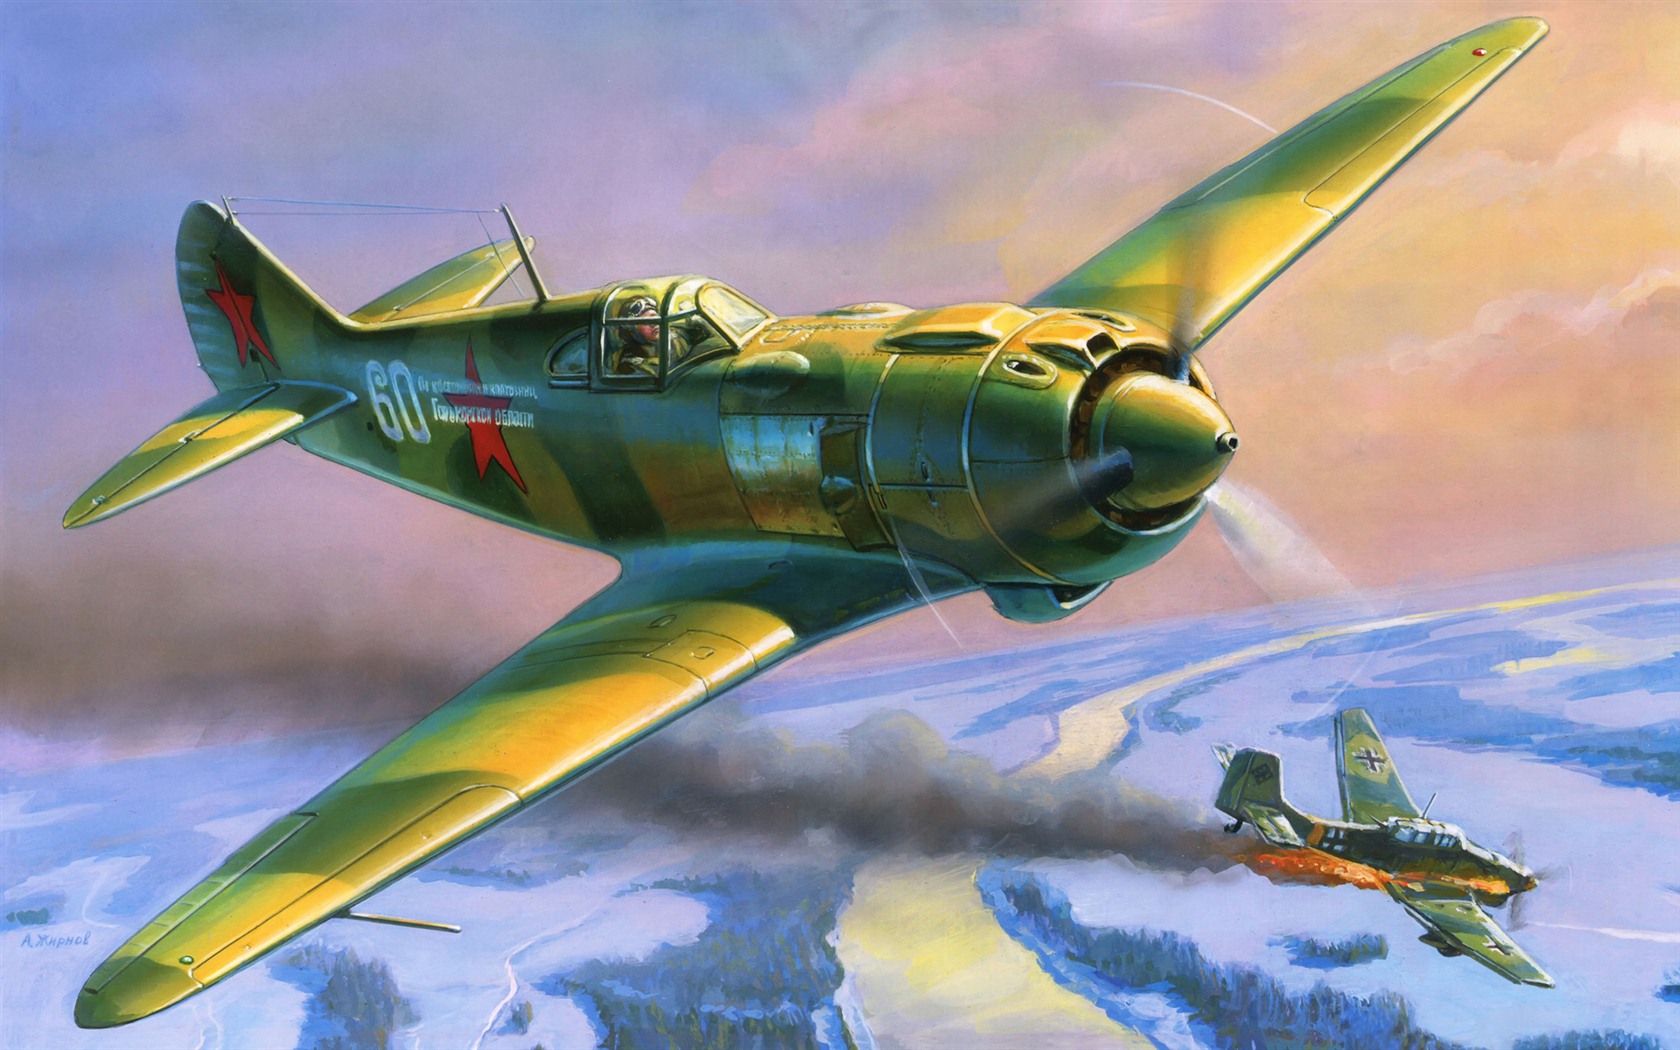 Military aircraft flight exquisite painting wallpapers #20 - 1680x1050